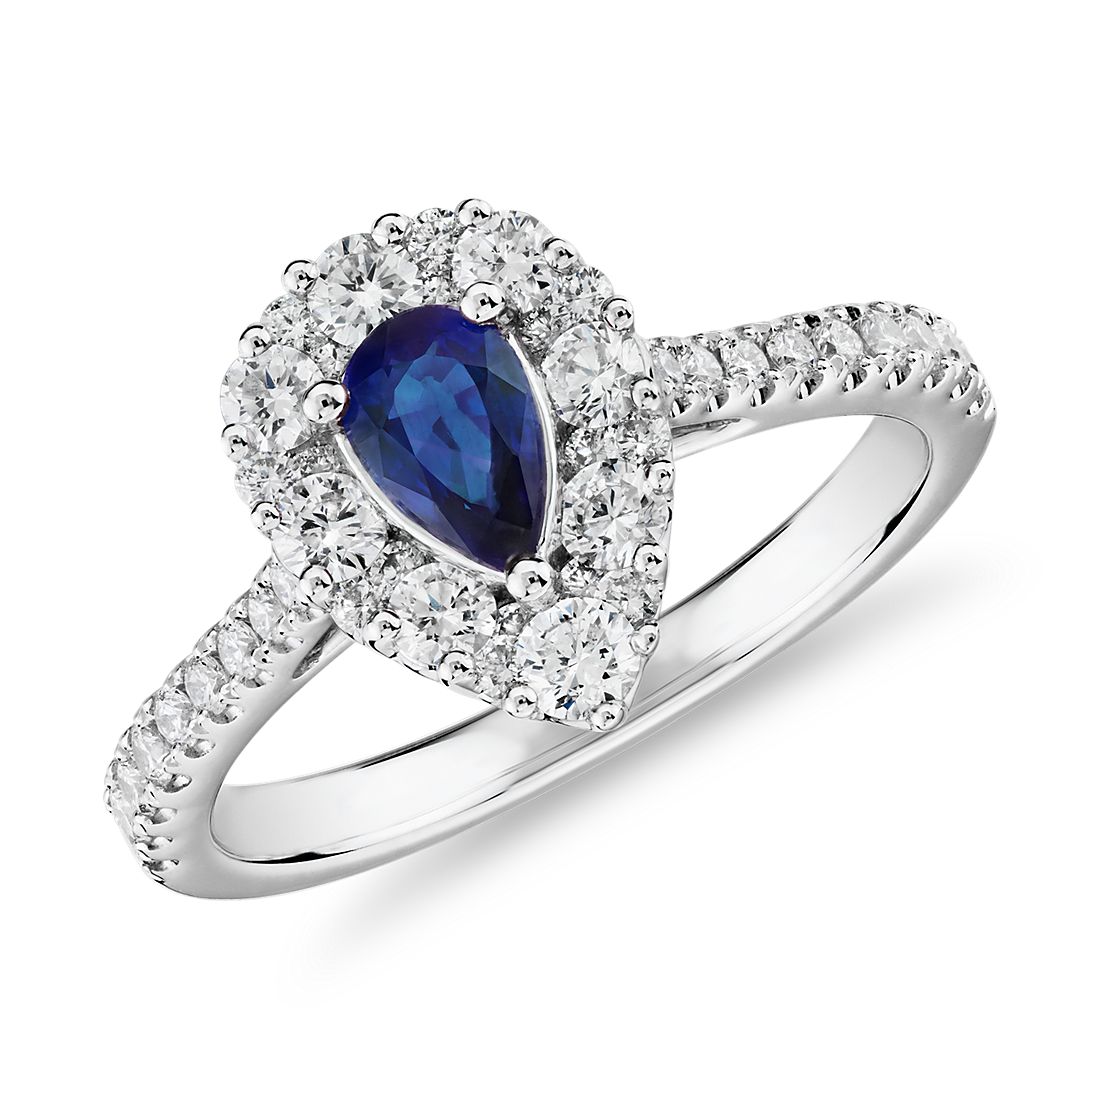 Pear Sapphire Ring with Diamond Halo in 14k White Gold (6x4mm)